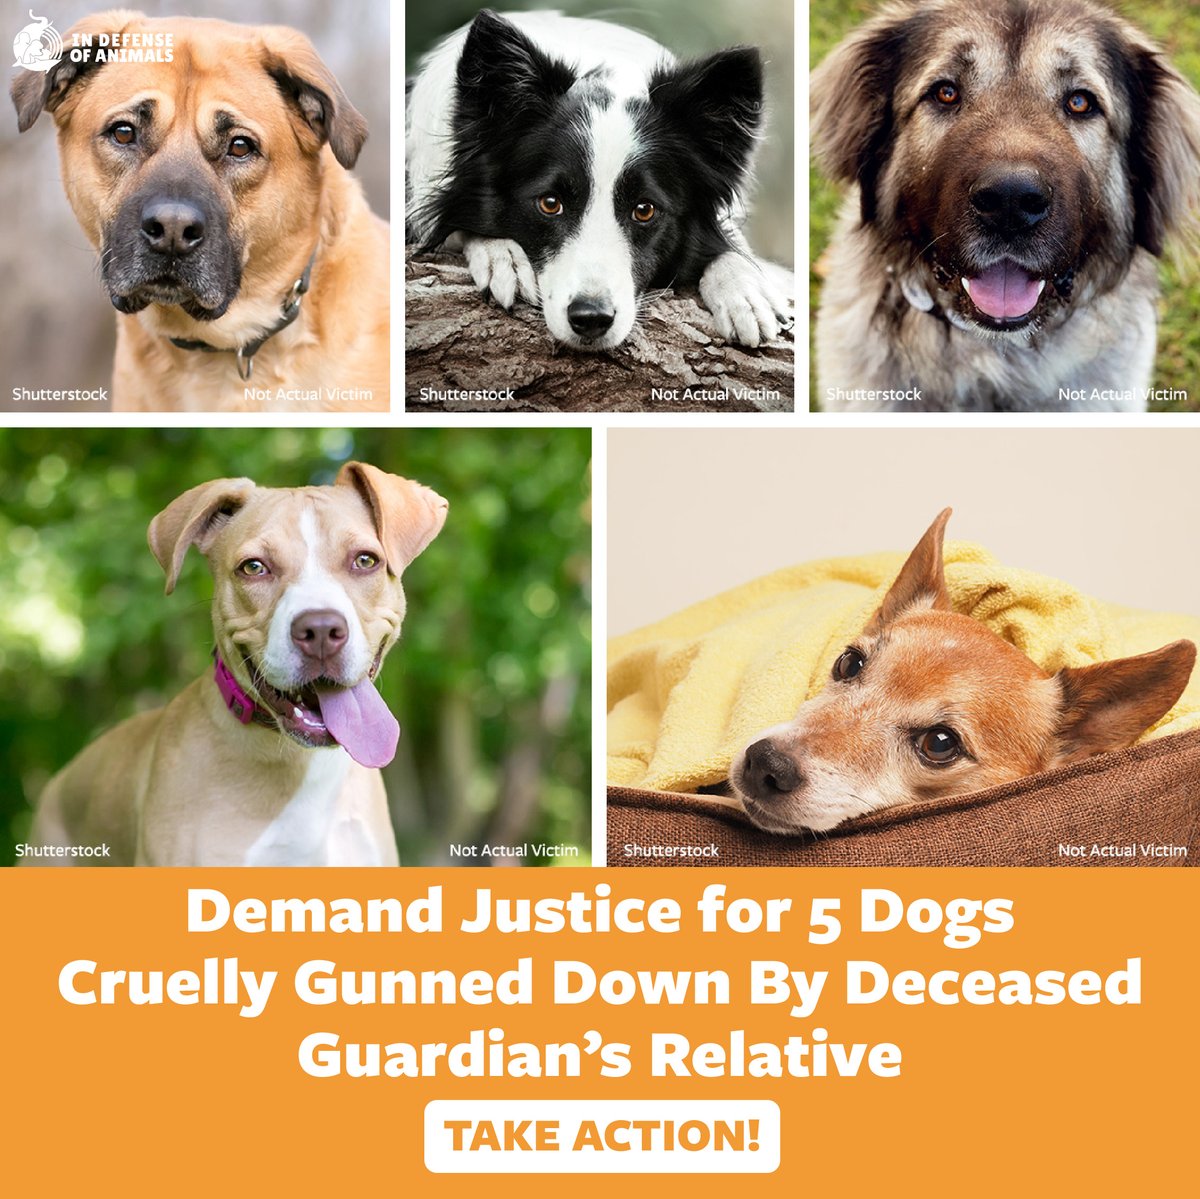 Help seek justice for a woman’s beloved dogs, who were cruelly killed by a relative just days after she passed away. #Justice4Animals Take action: bit.ly/4dUJewf Pls RT and support our work on this issue bit.ly/4dVxY2P